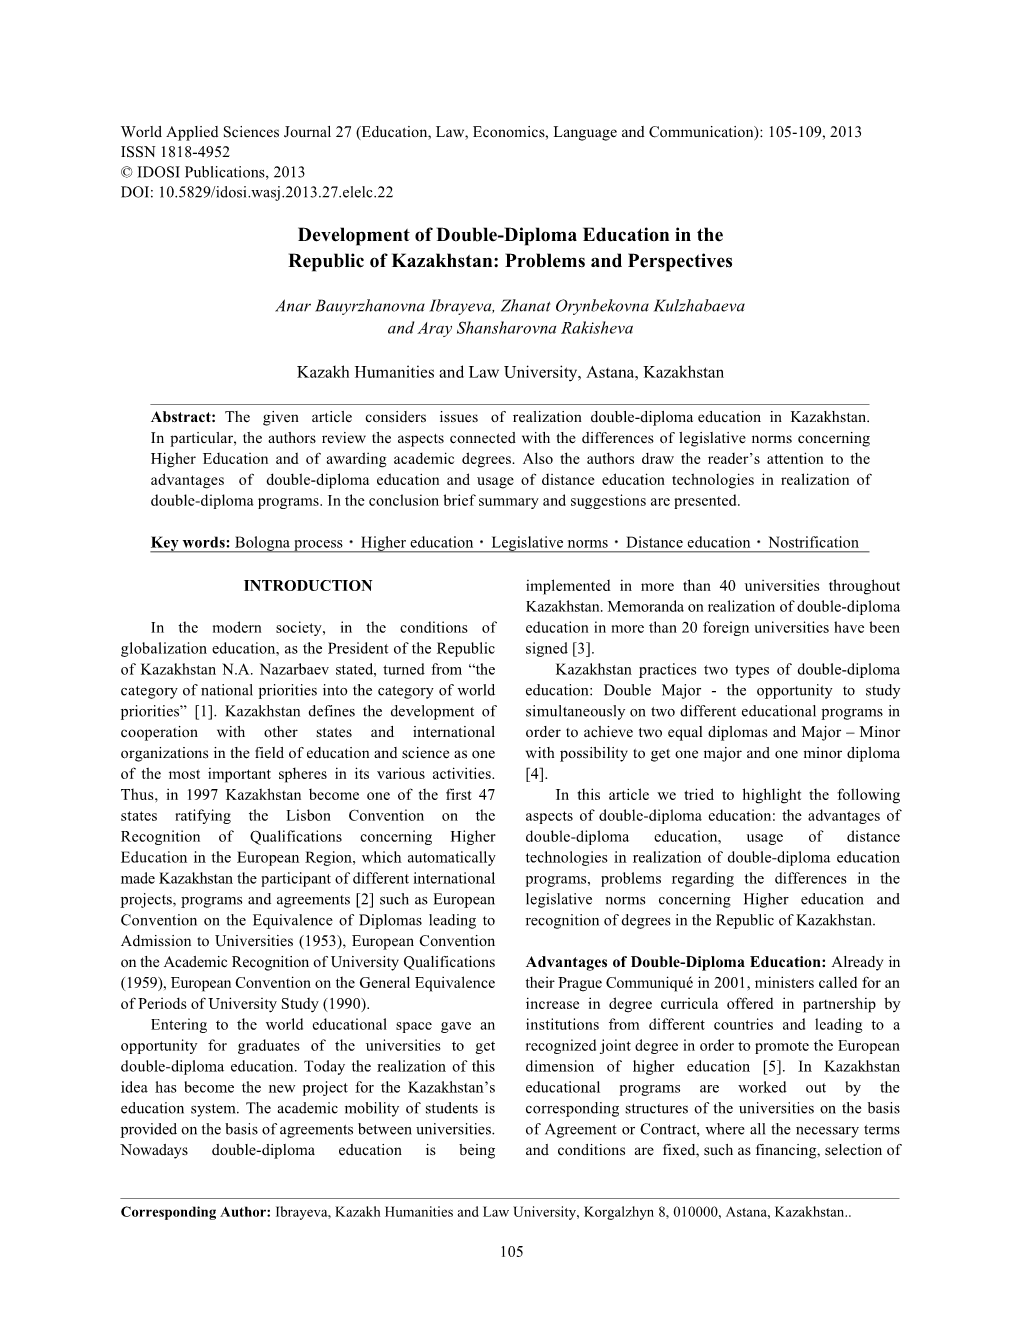 Development of Double-Diploma Education in the Republic of Kazakhstan: Problems and Perspectives